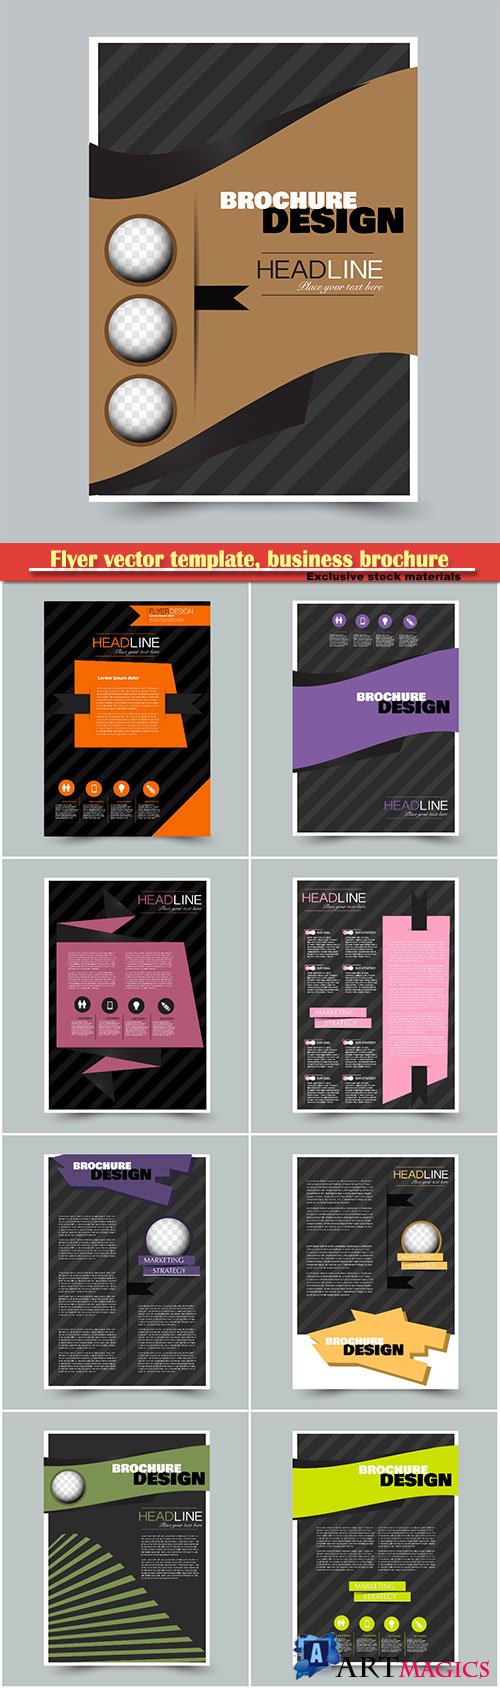 Flyer vector template, business brochure, magazine cover # 16